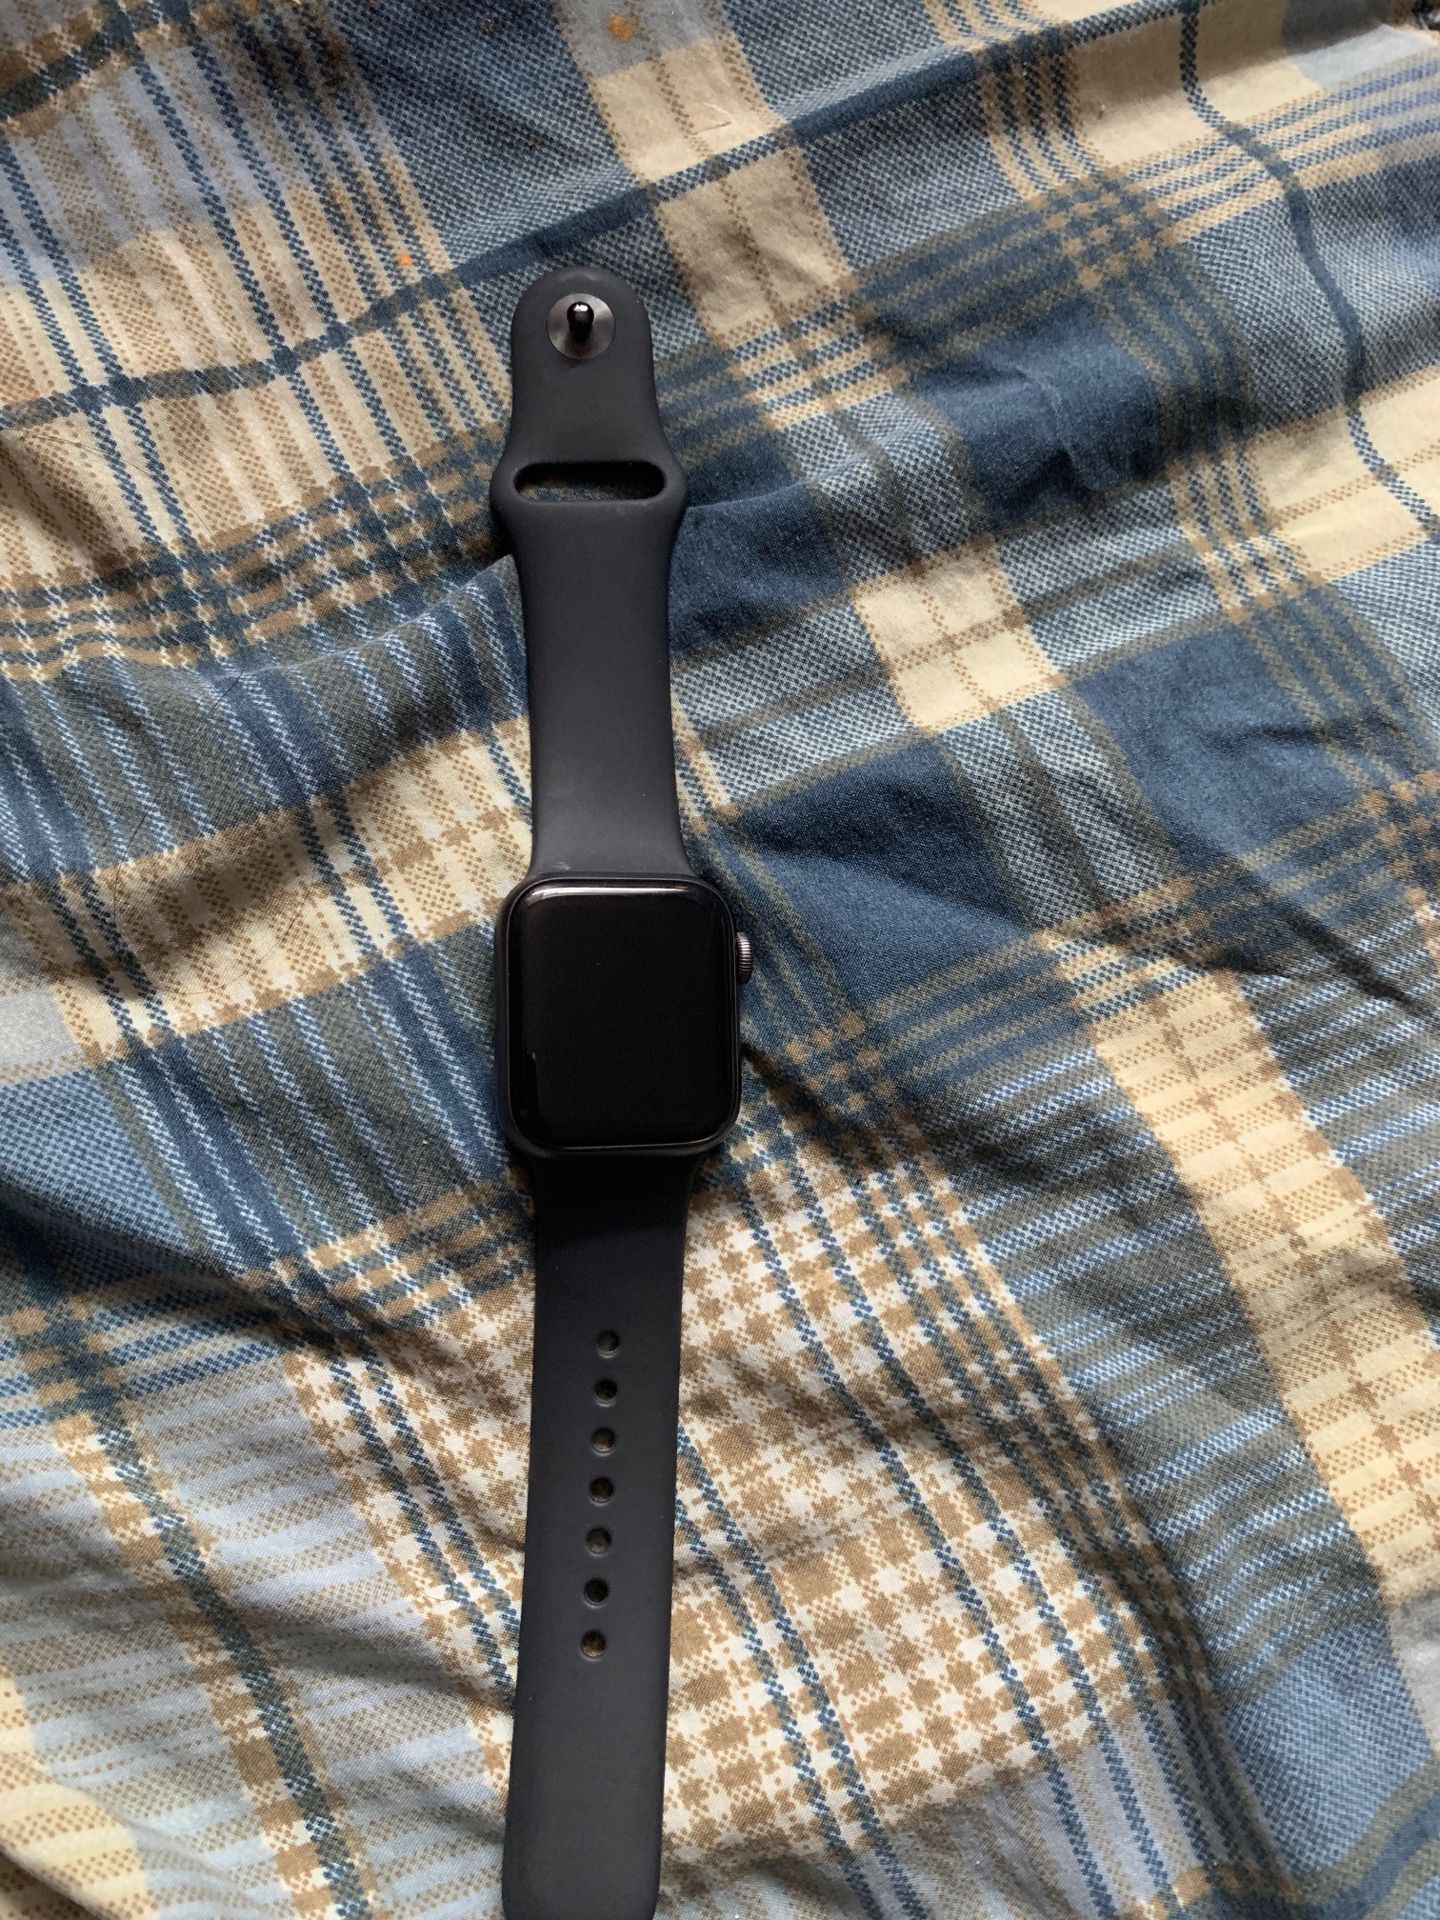 Apple Watch series 4 space gray